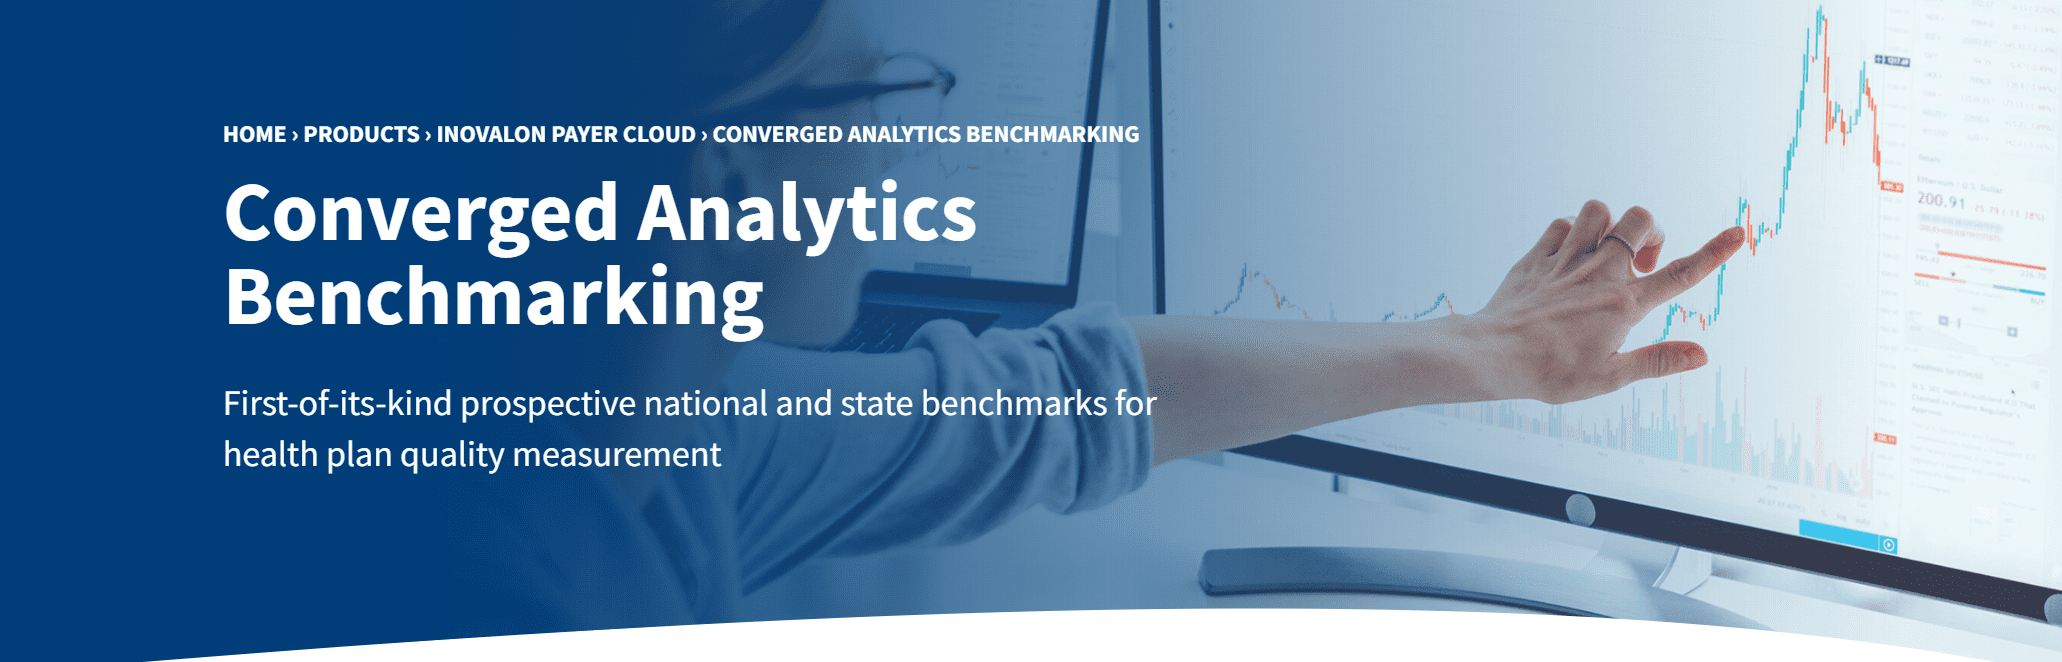 Inovalon Launches Converged Analytics Benchmarking for Health Plans